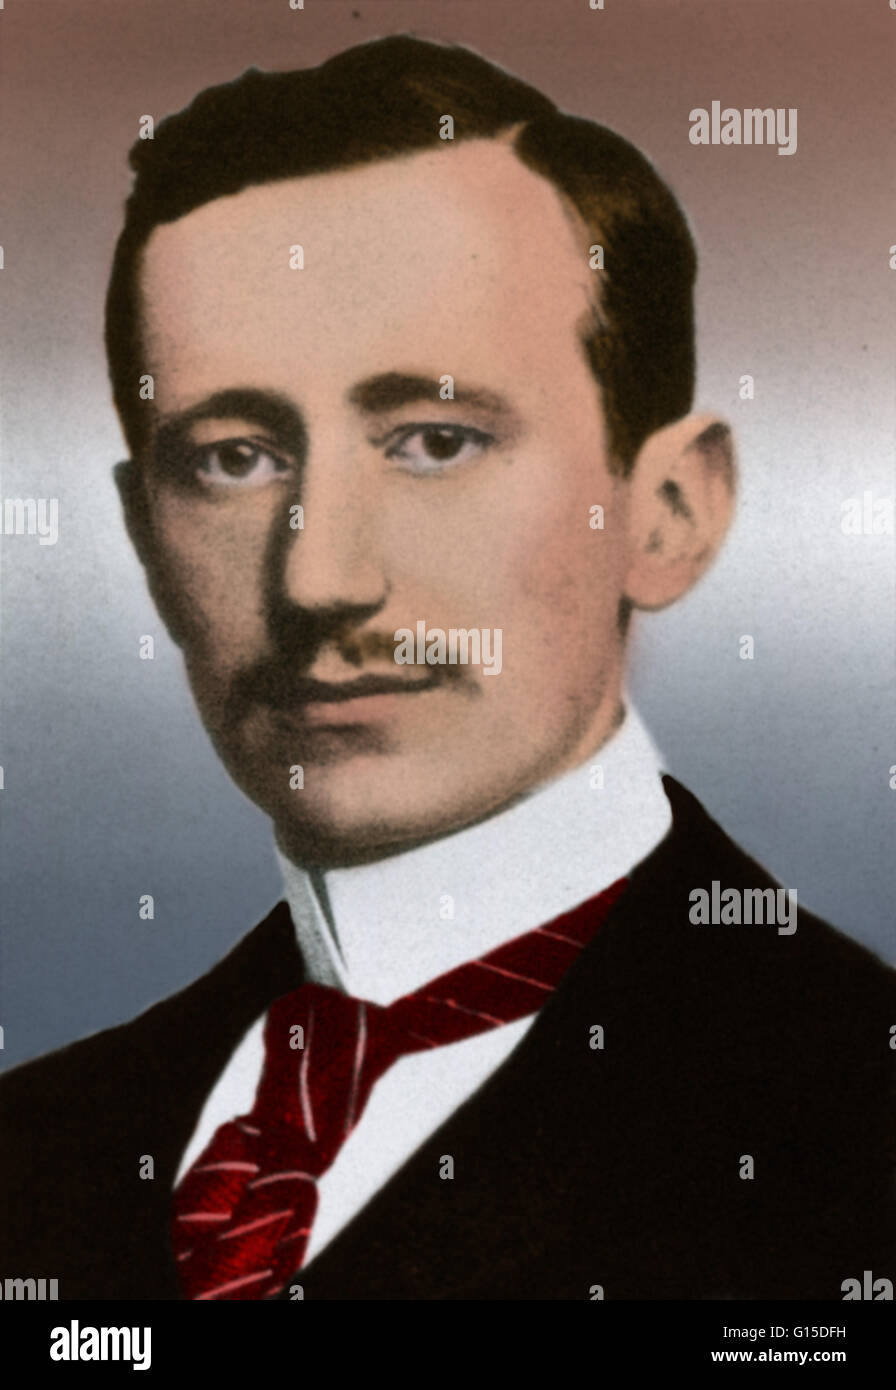 Guglielmo Marconi (April 25, 1874 - July 20 1937) was an Italian inventor, known as the father of long distance radio transmission and for his development of Marconi's law and a radio telegraph system. Marconi is often credited as the inventor of radio, a Stock Photo